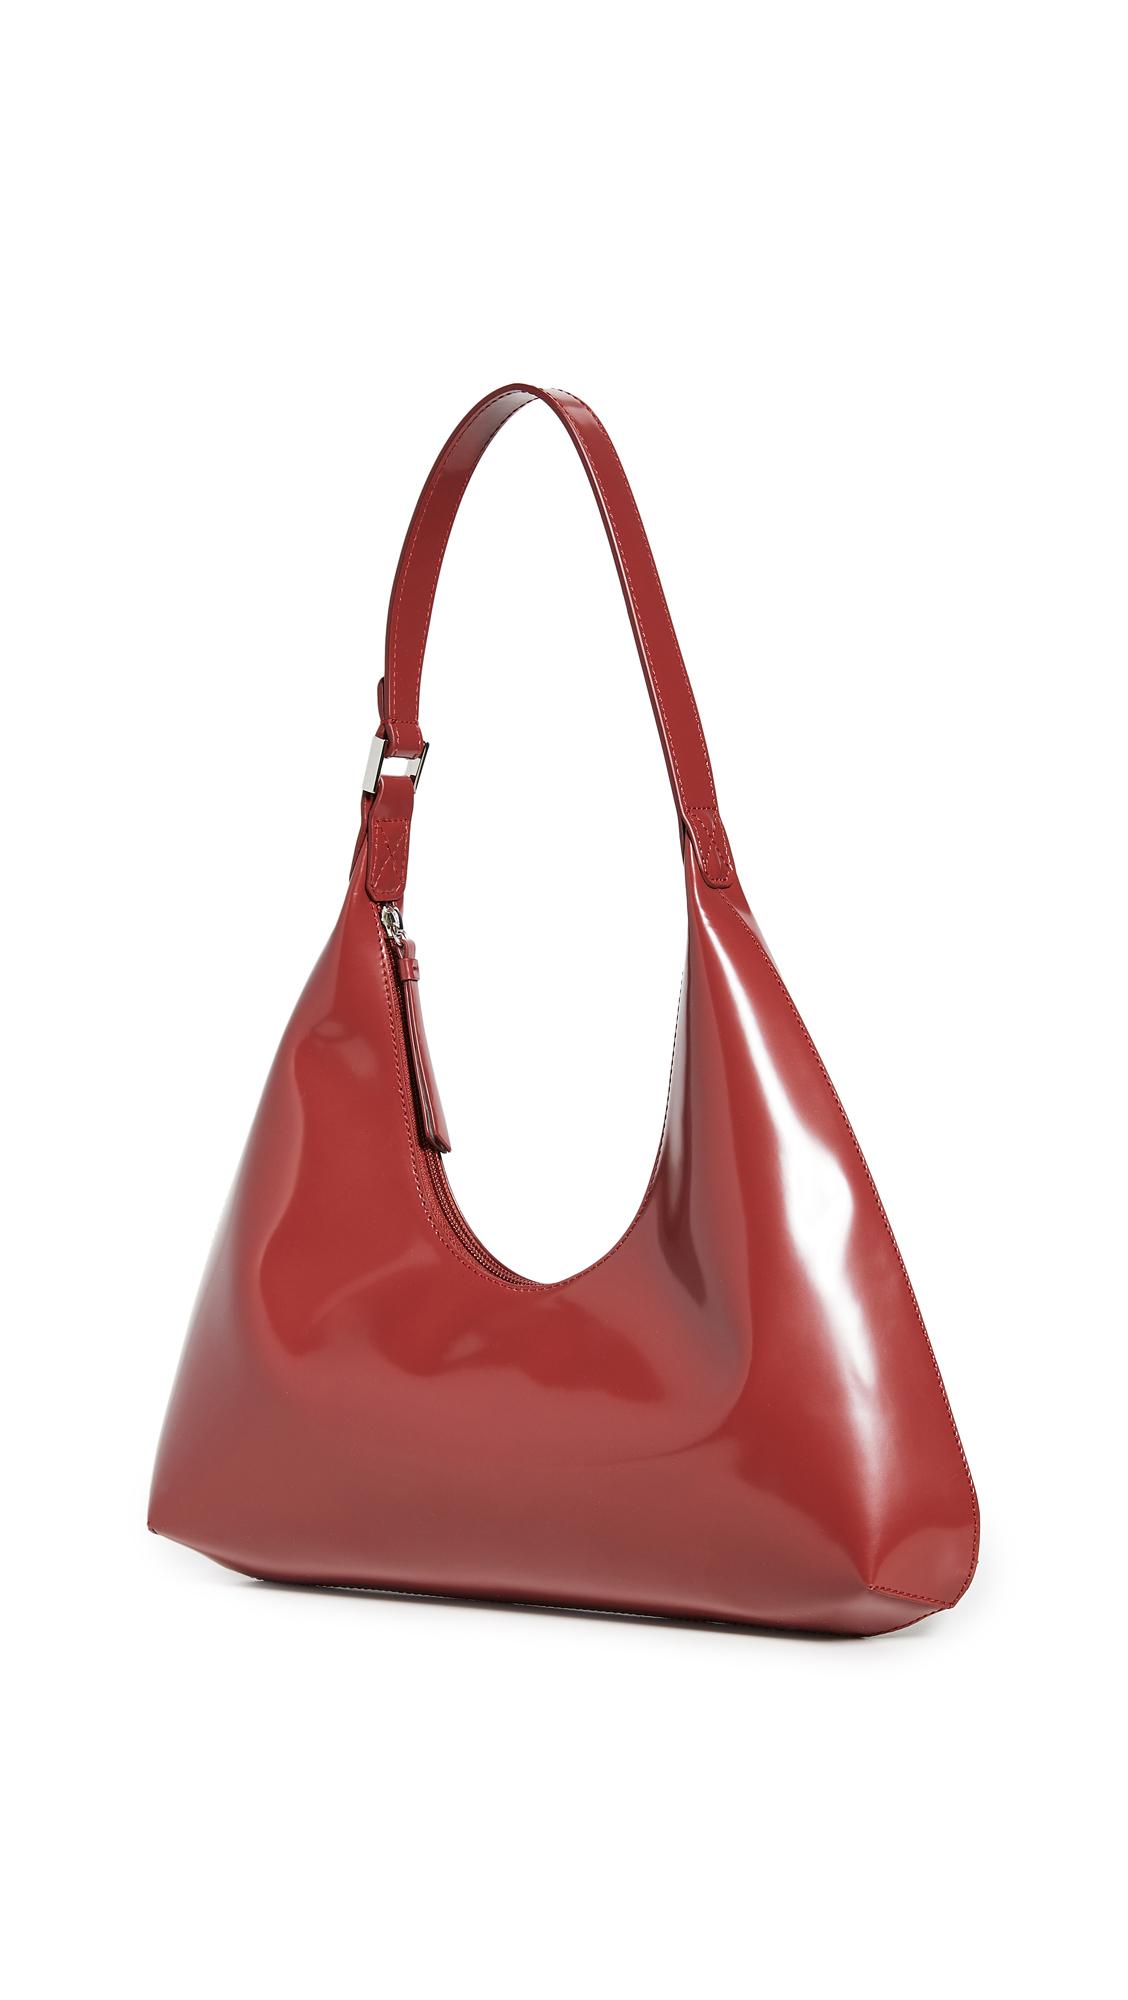 BY FAR Leather Amber Bag in Red - Lyst